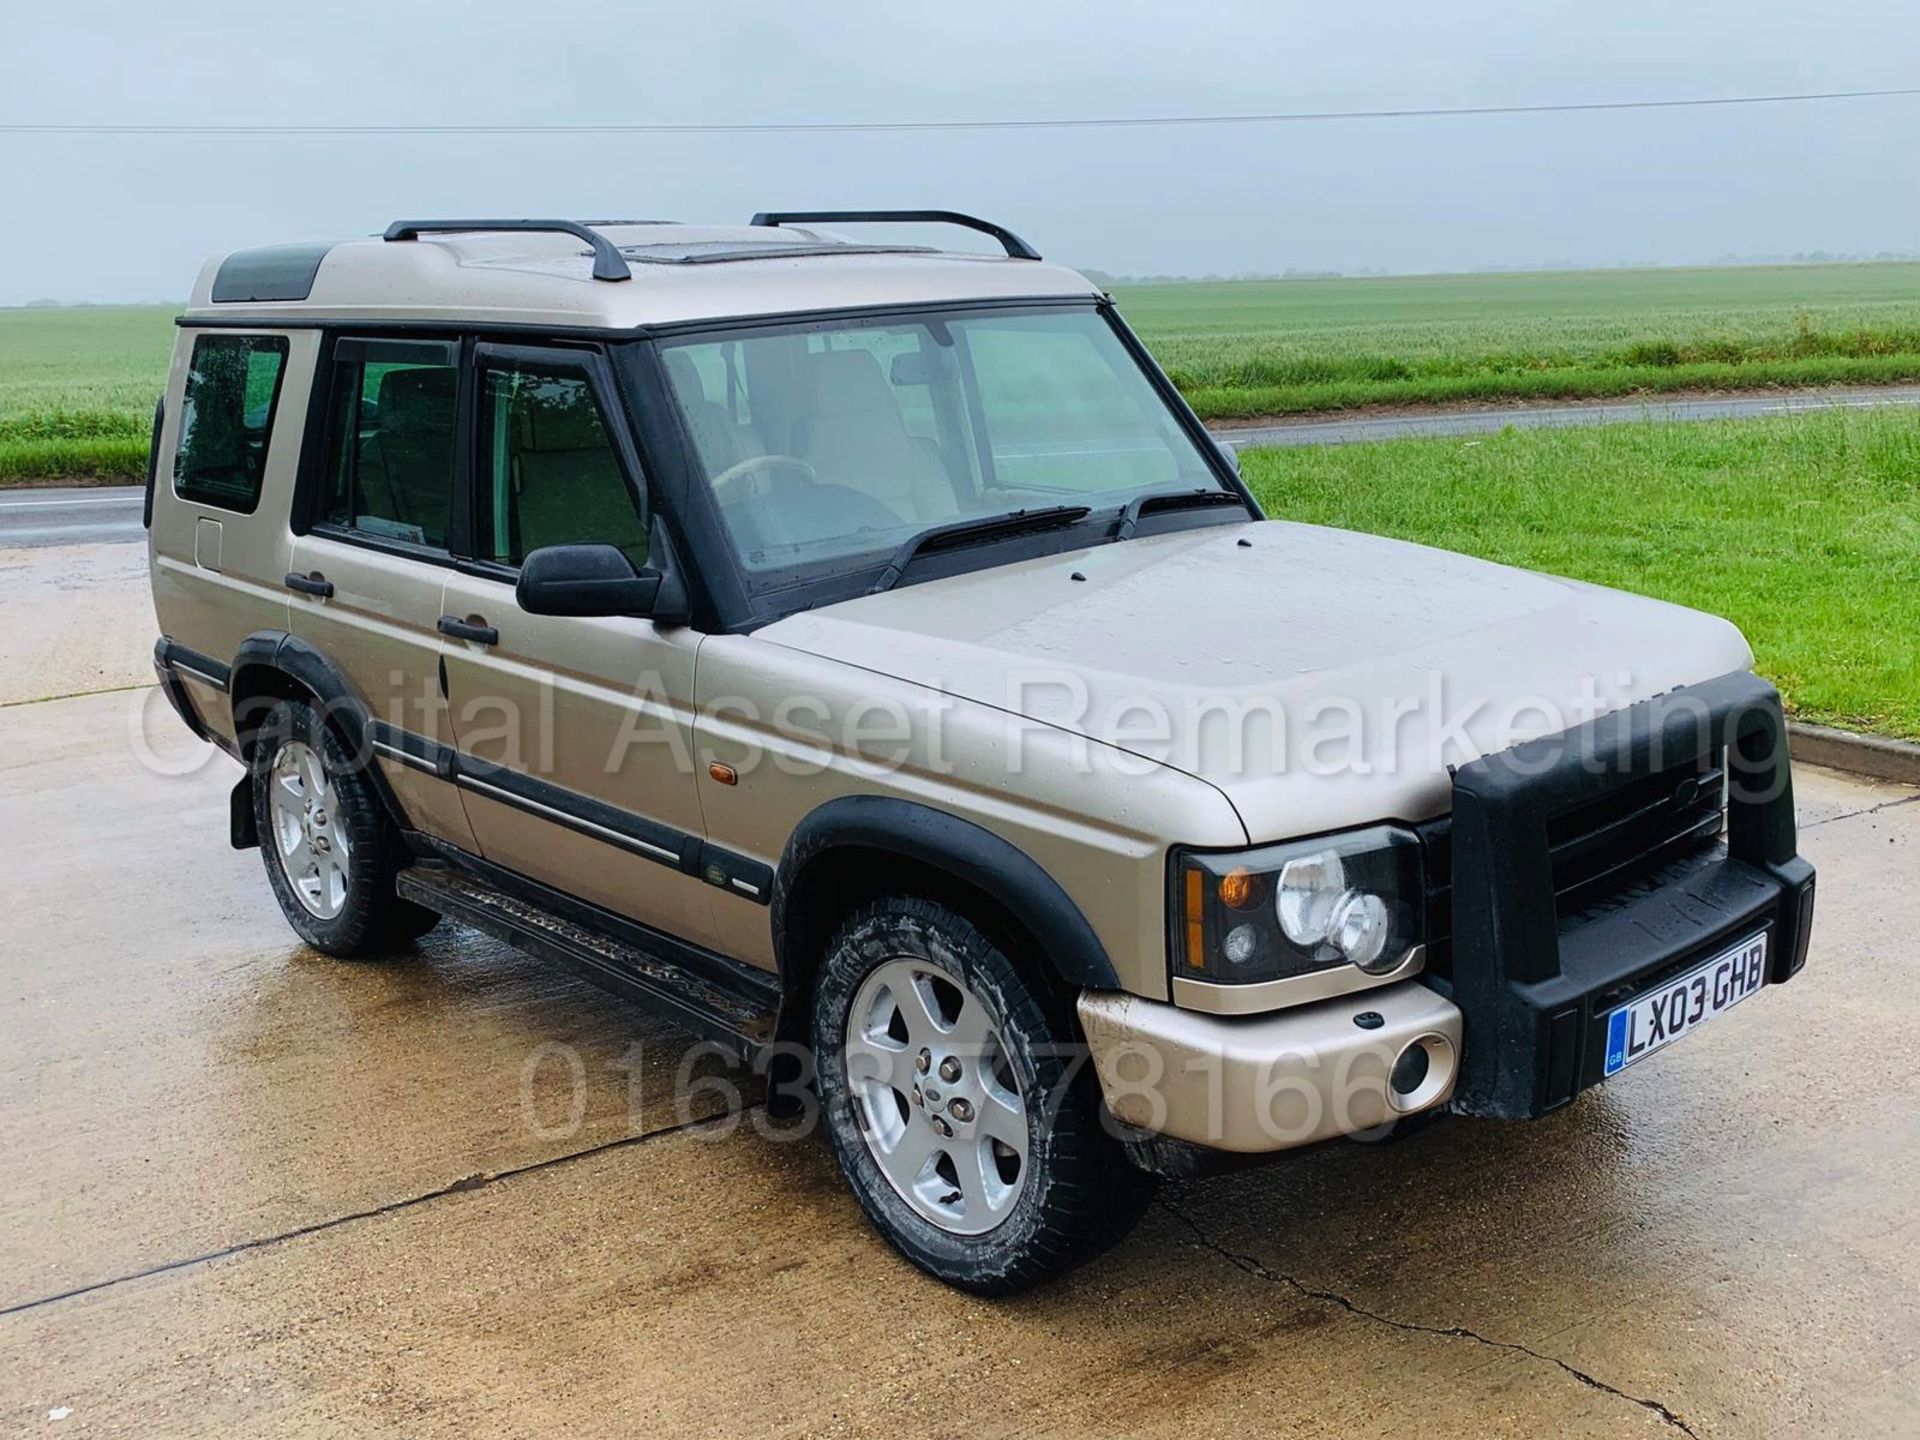 (On Sale) LAND ROVER DISCOVERY *7 SEATER SUV* (2003) 'TD5 - 138 BHP' *LEATHER - AIR CON* (NO VAT) - Image 10 of 47